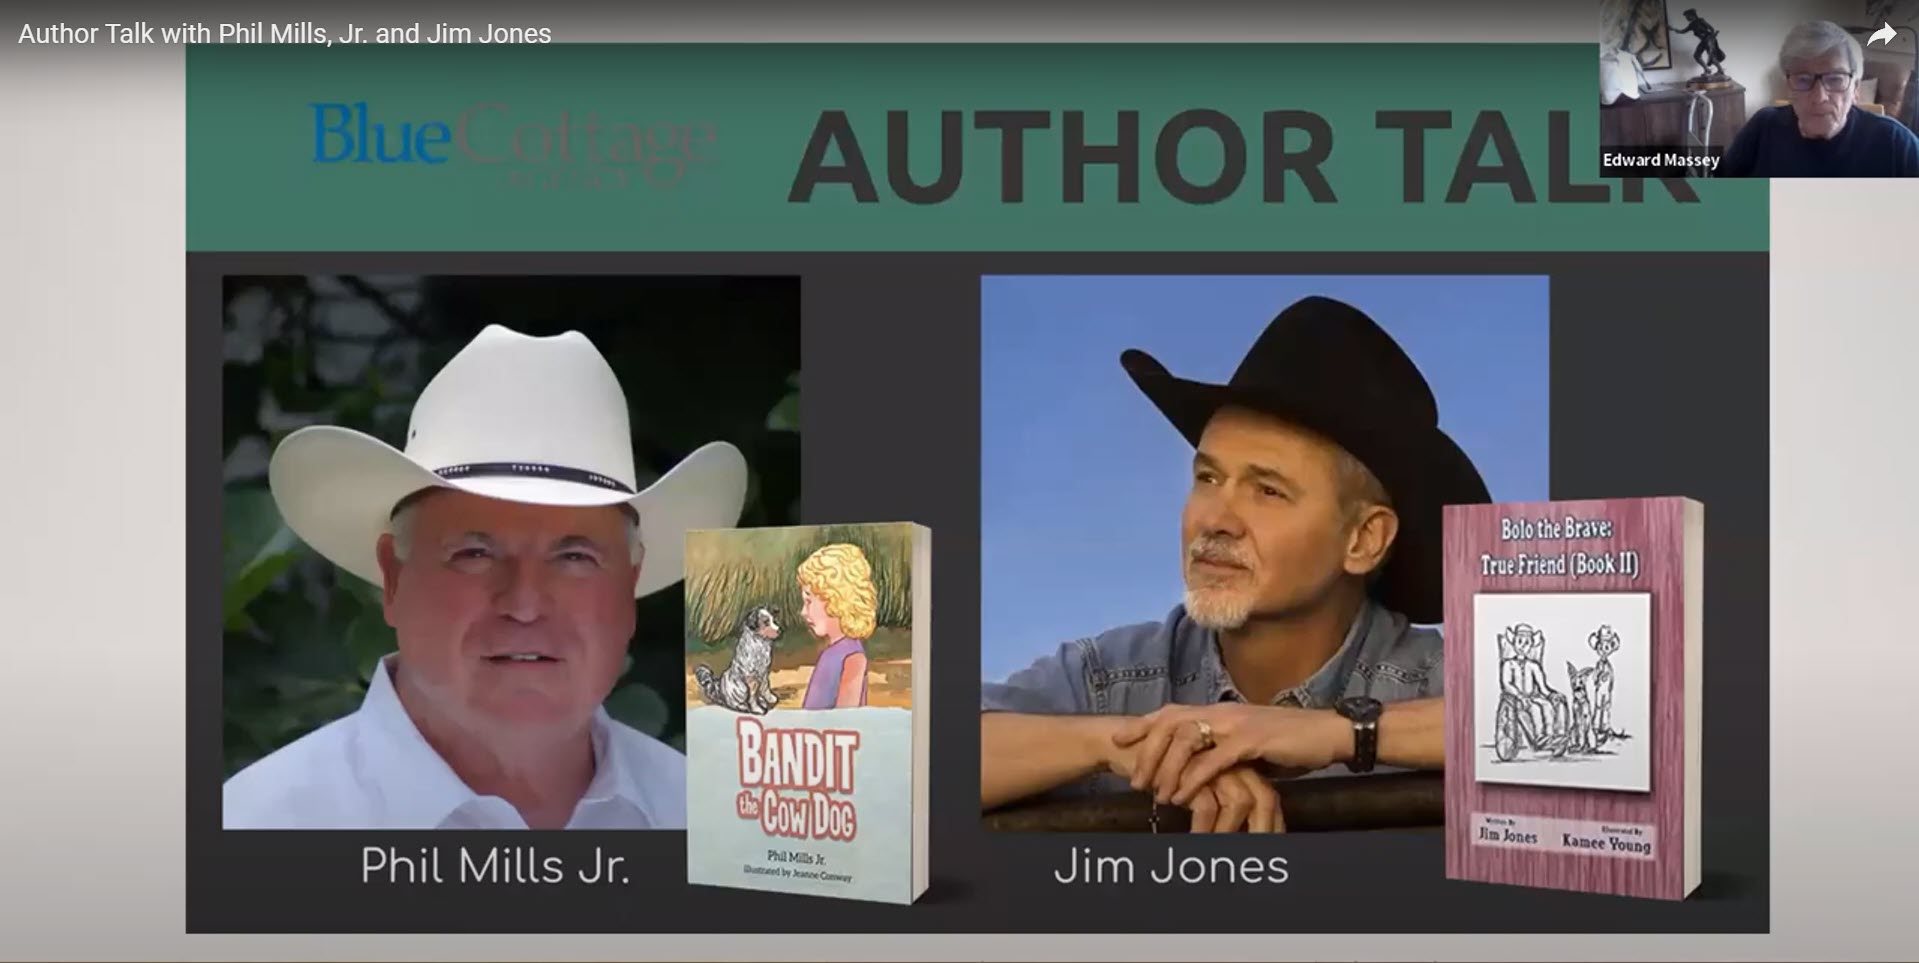 Author Talk with Phil Mills, Jr. and Jim Jones